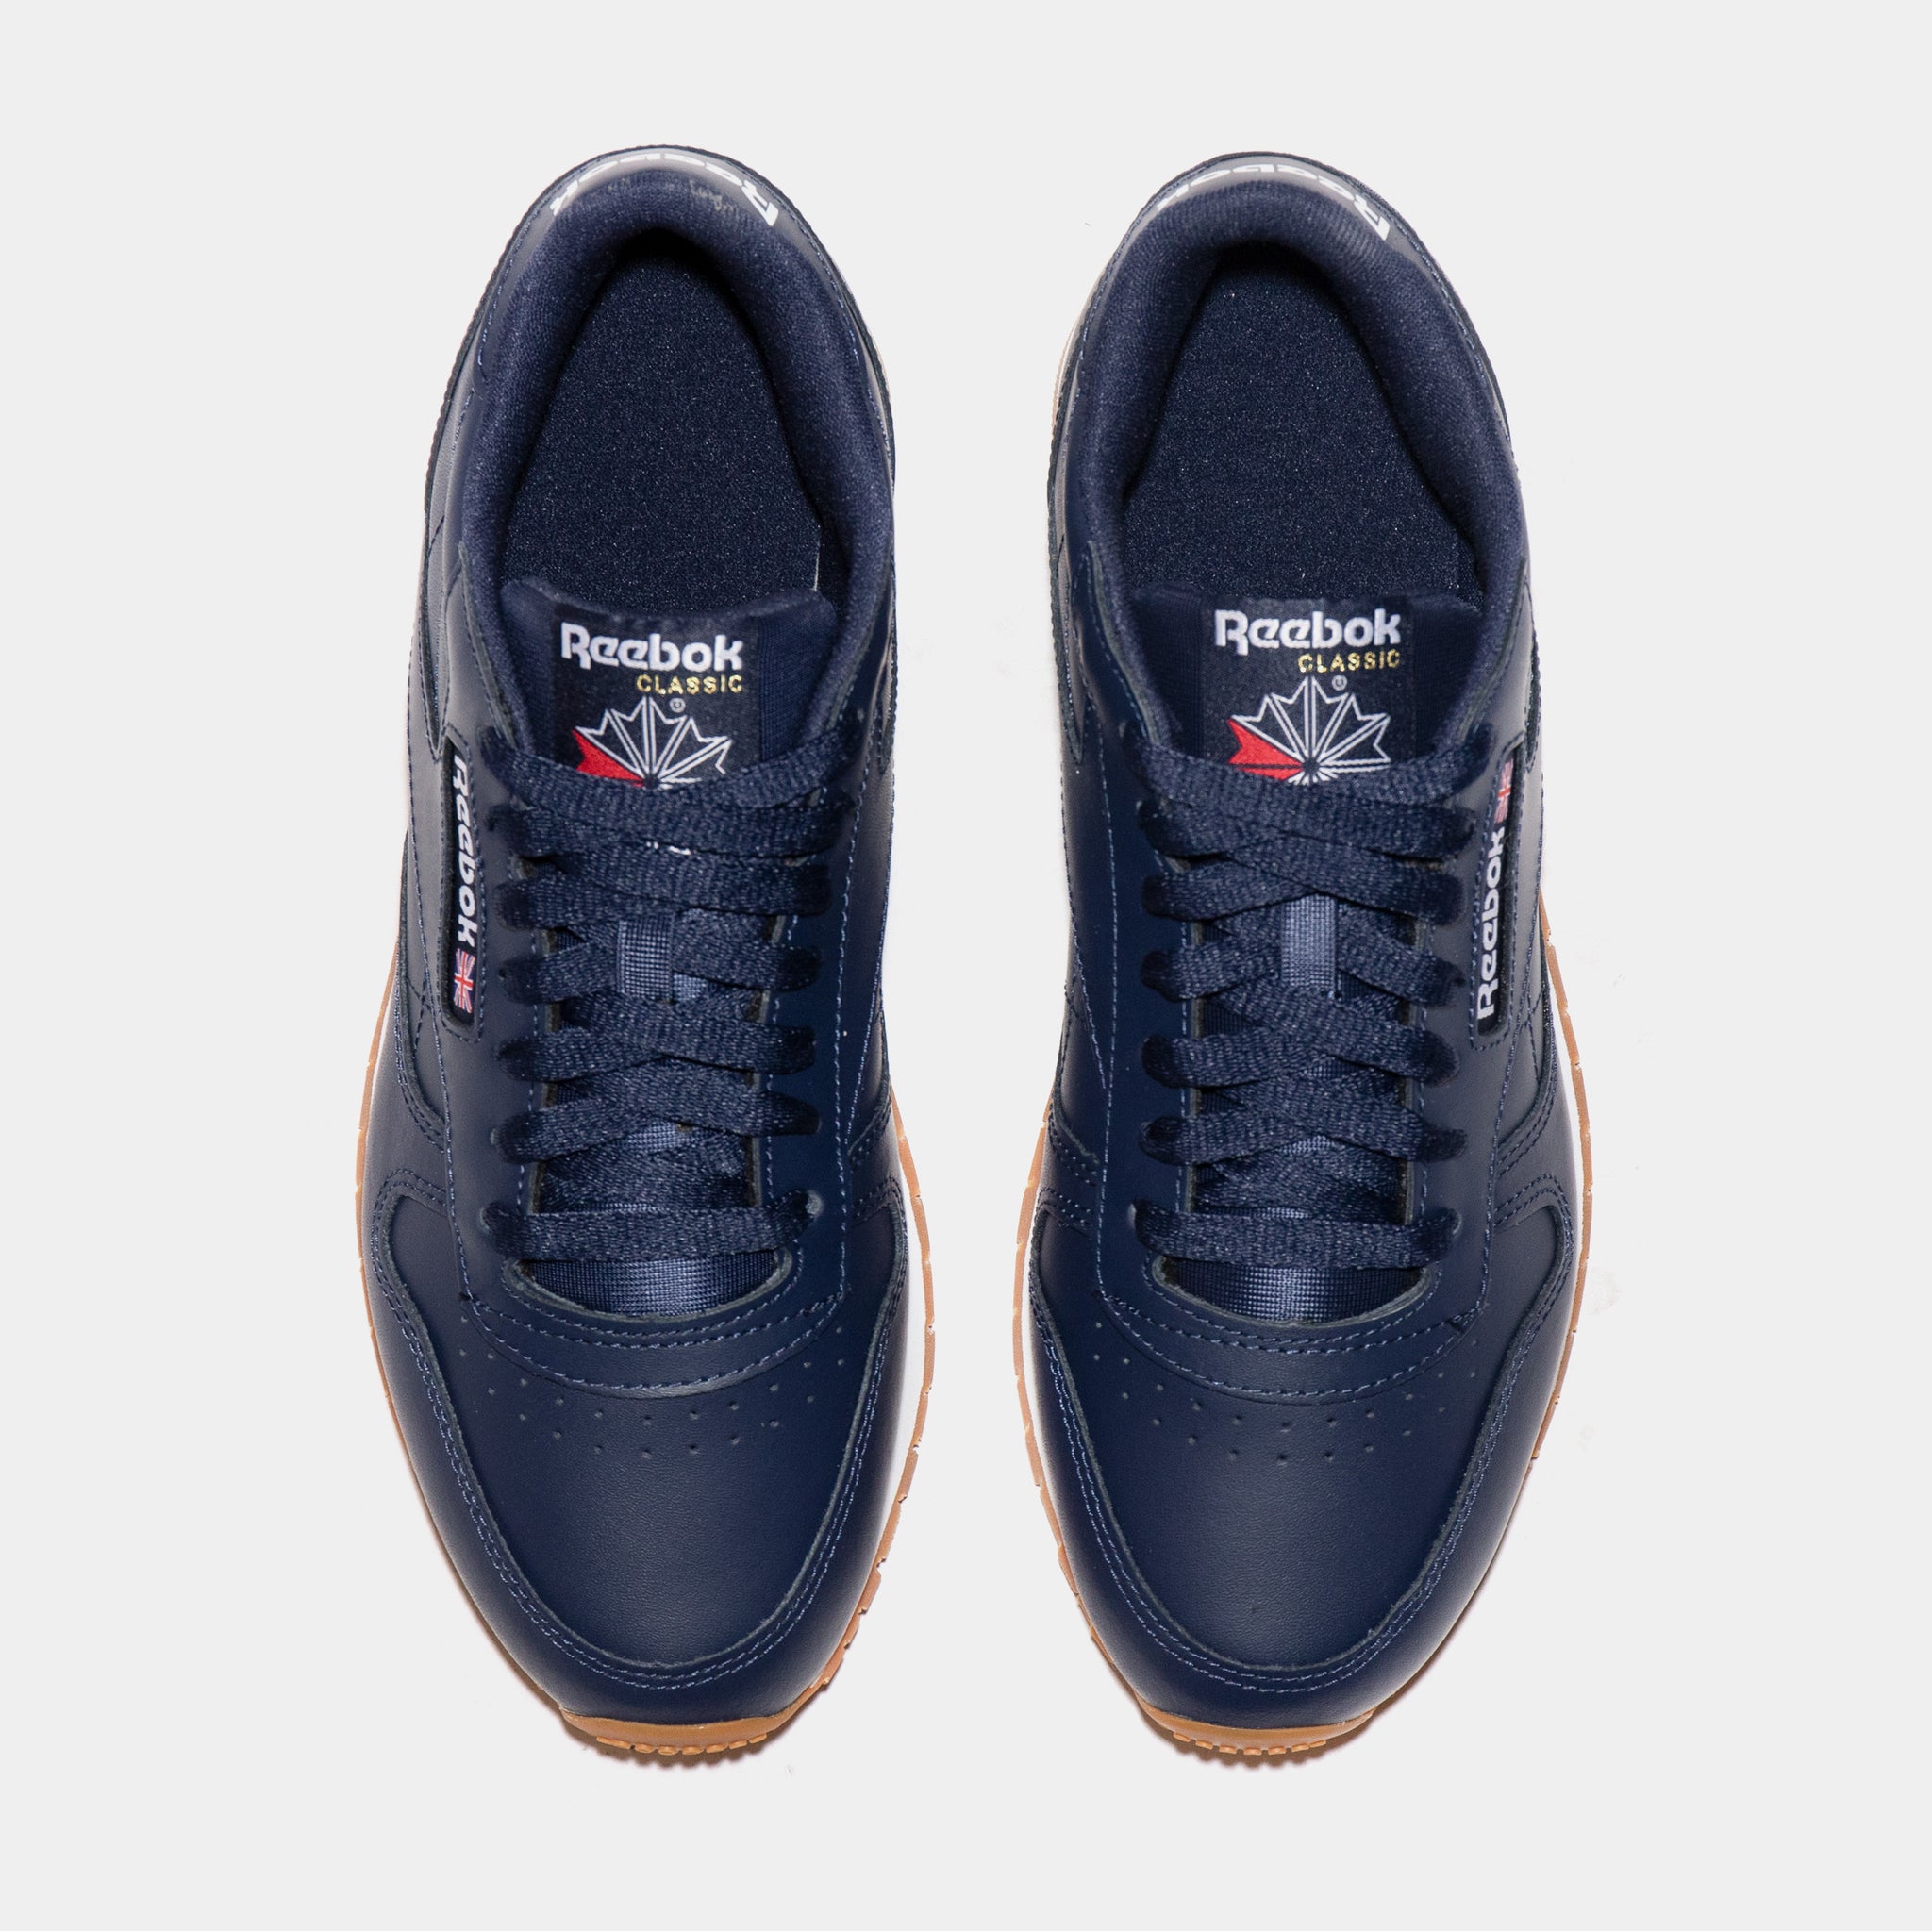 Classic Leather Mens Lifestyle Shoes Navy Blue GY3600 Palace